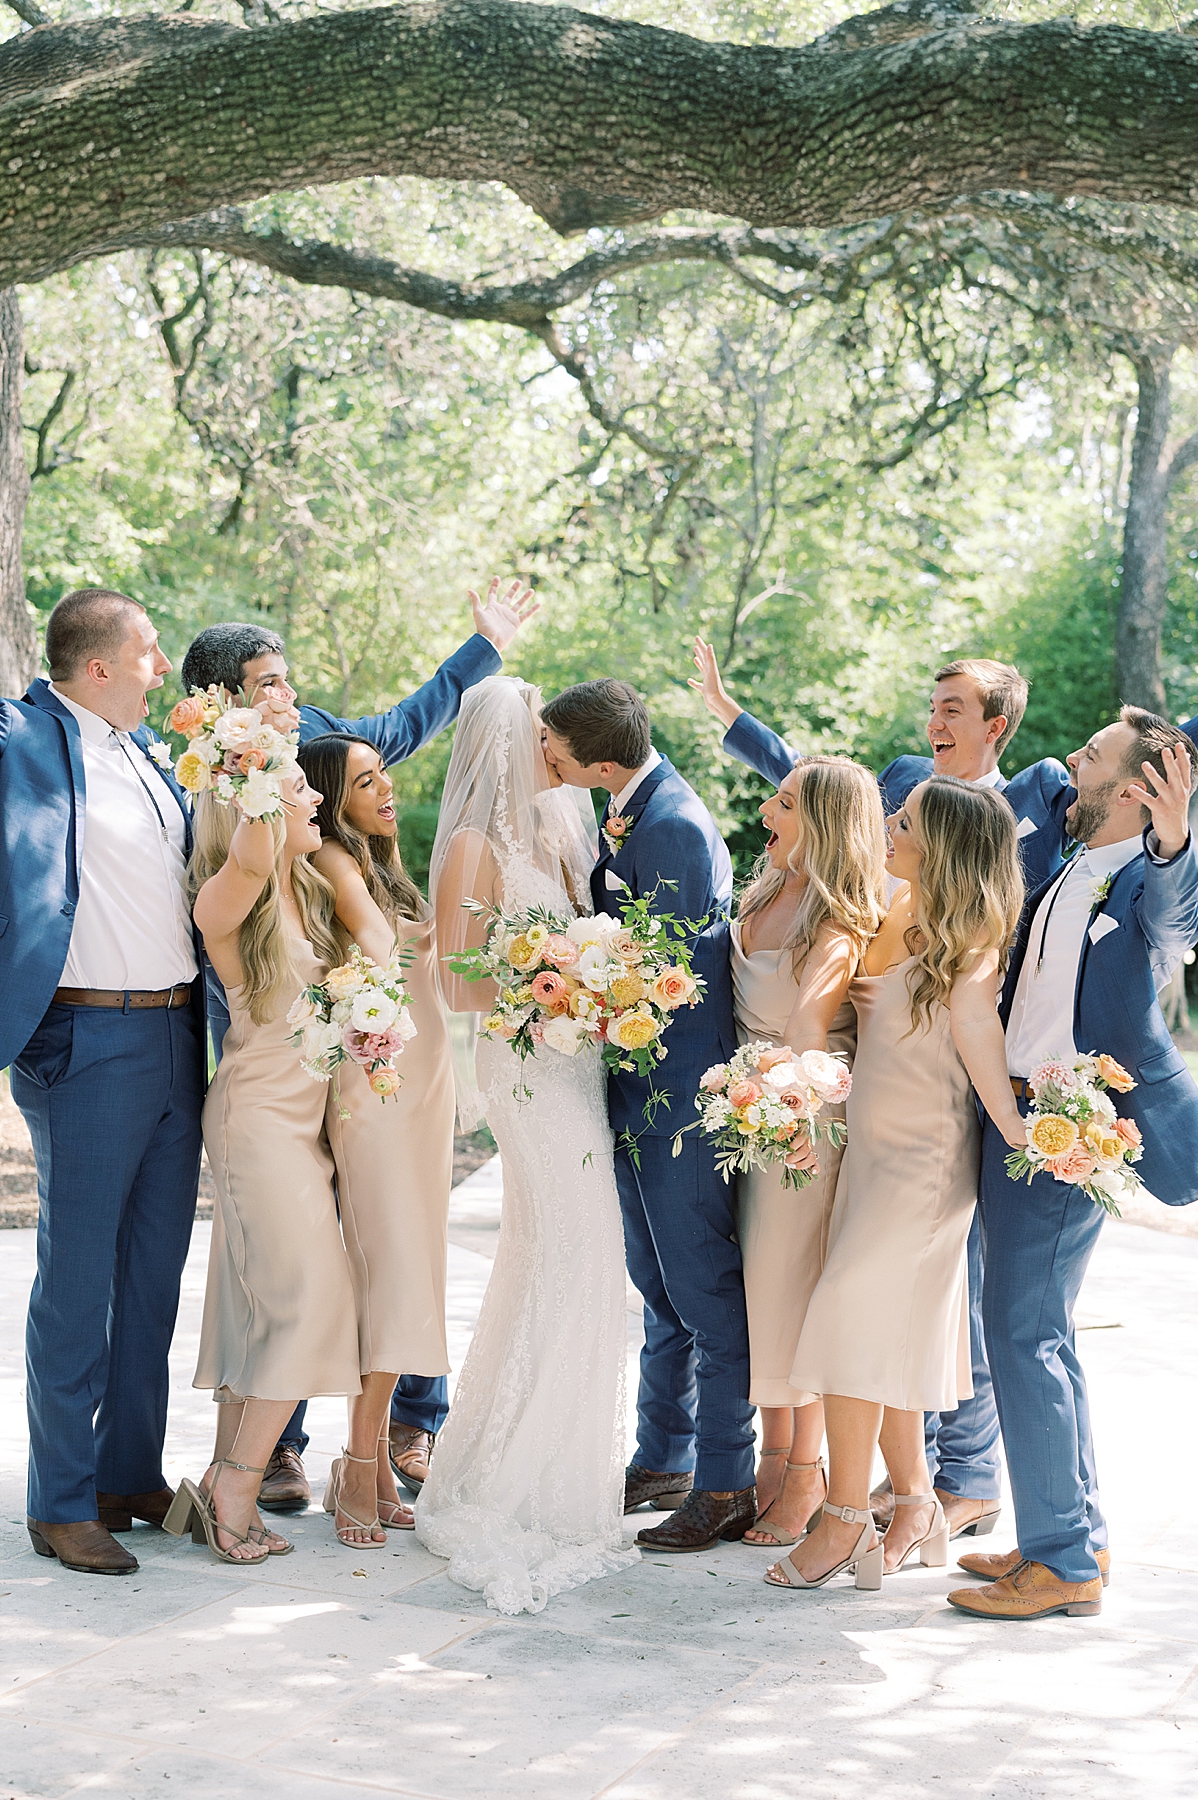 "We have chosen Texas as our home, and even though we aren't from here, we've absolutely loved living here and wanted to honor our chosen home on our day with a little western flair." A custom horseshoe logo, bolo ties, and cowboy boots encouraged..! This super fun western Mercury Hall Wedding was one for the books! Click through to see all of their fun custom wedding details!